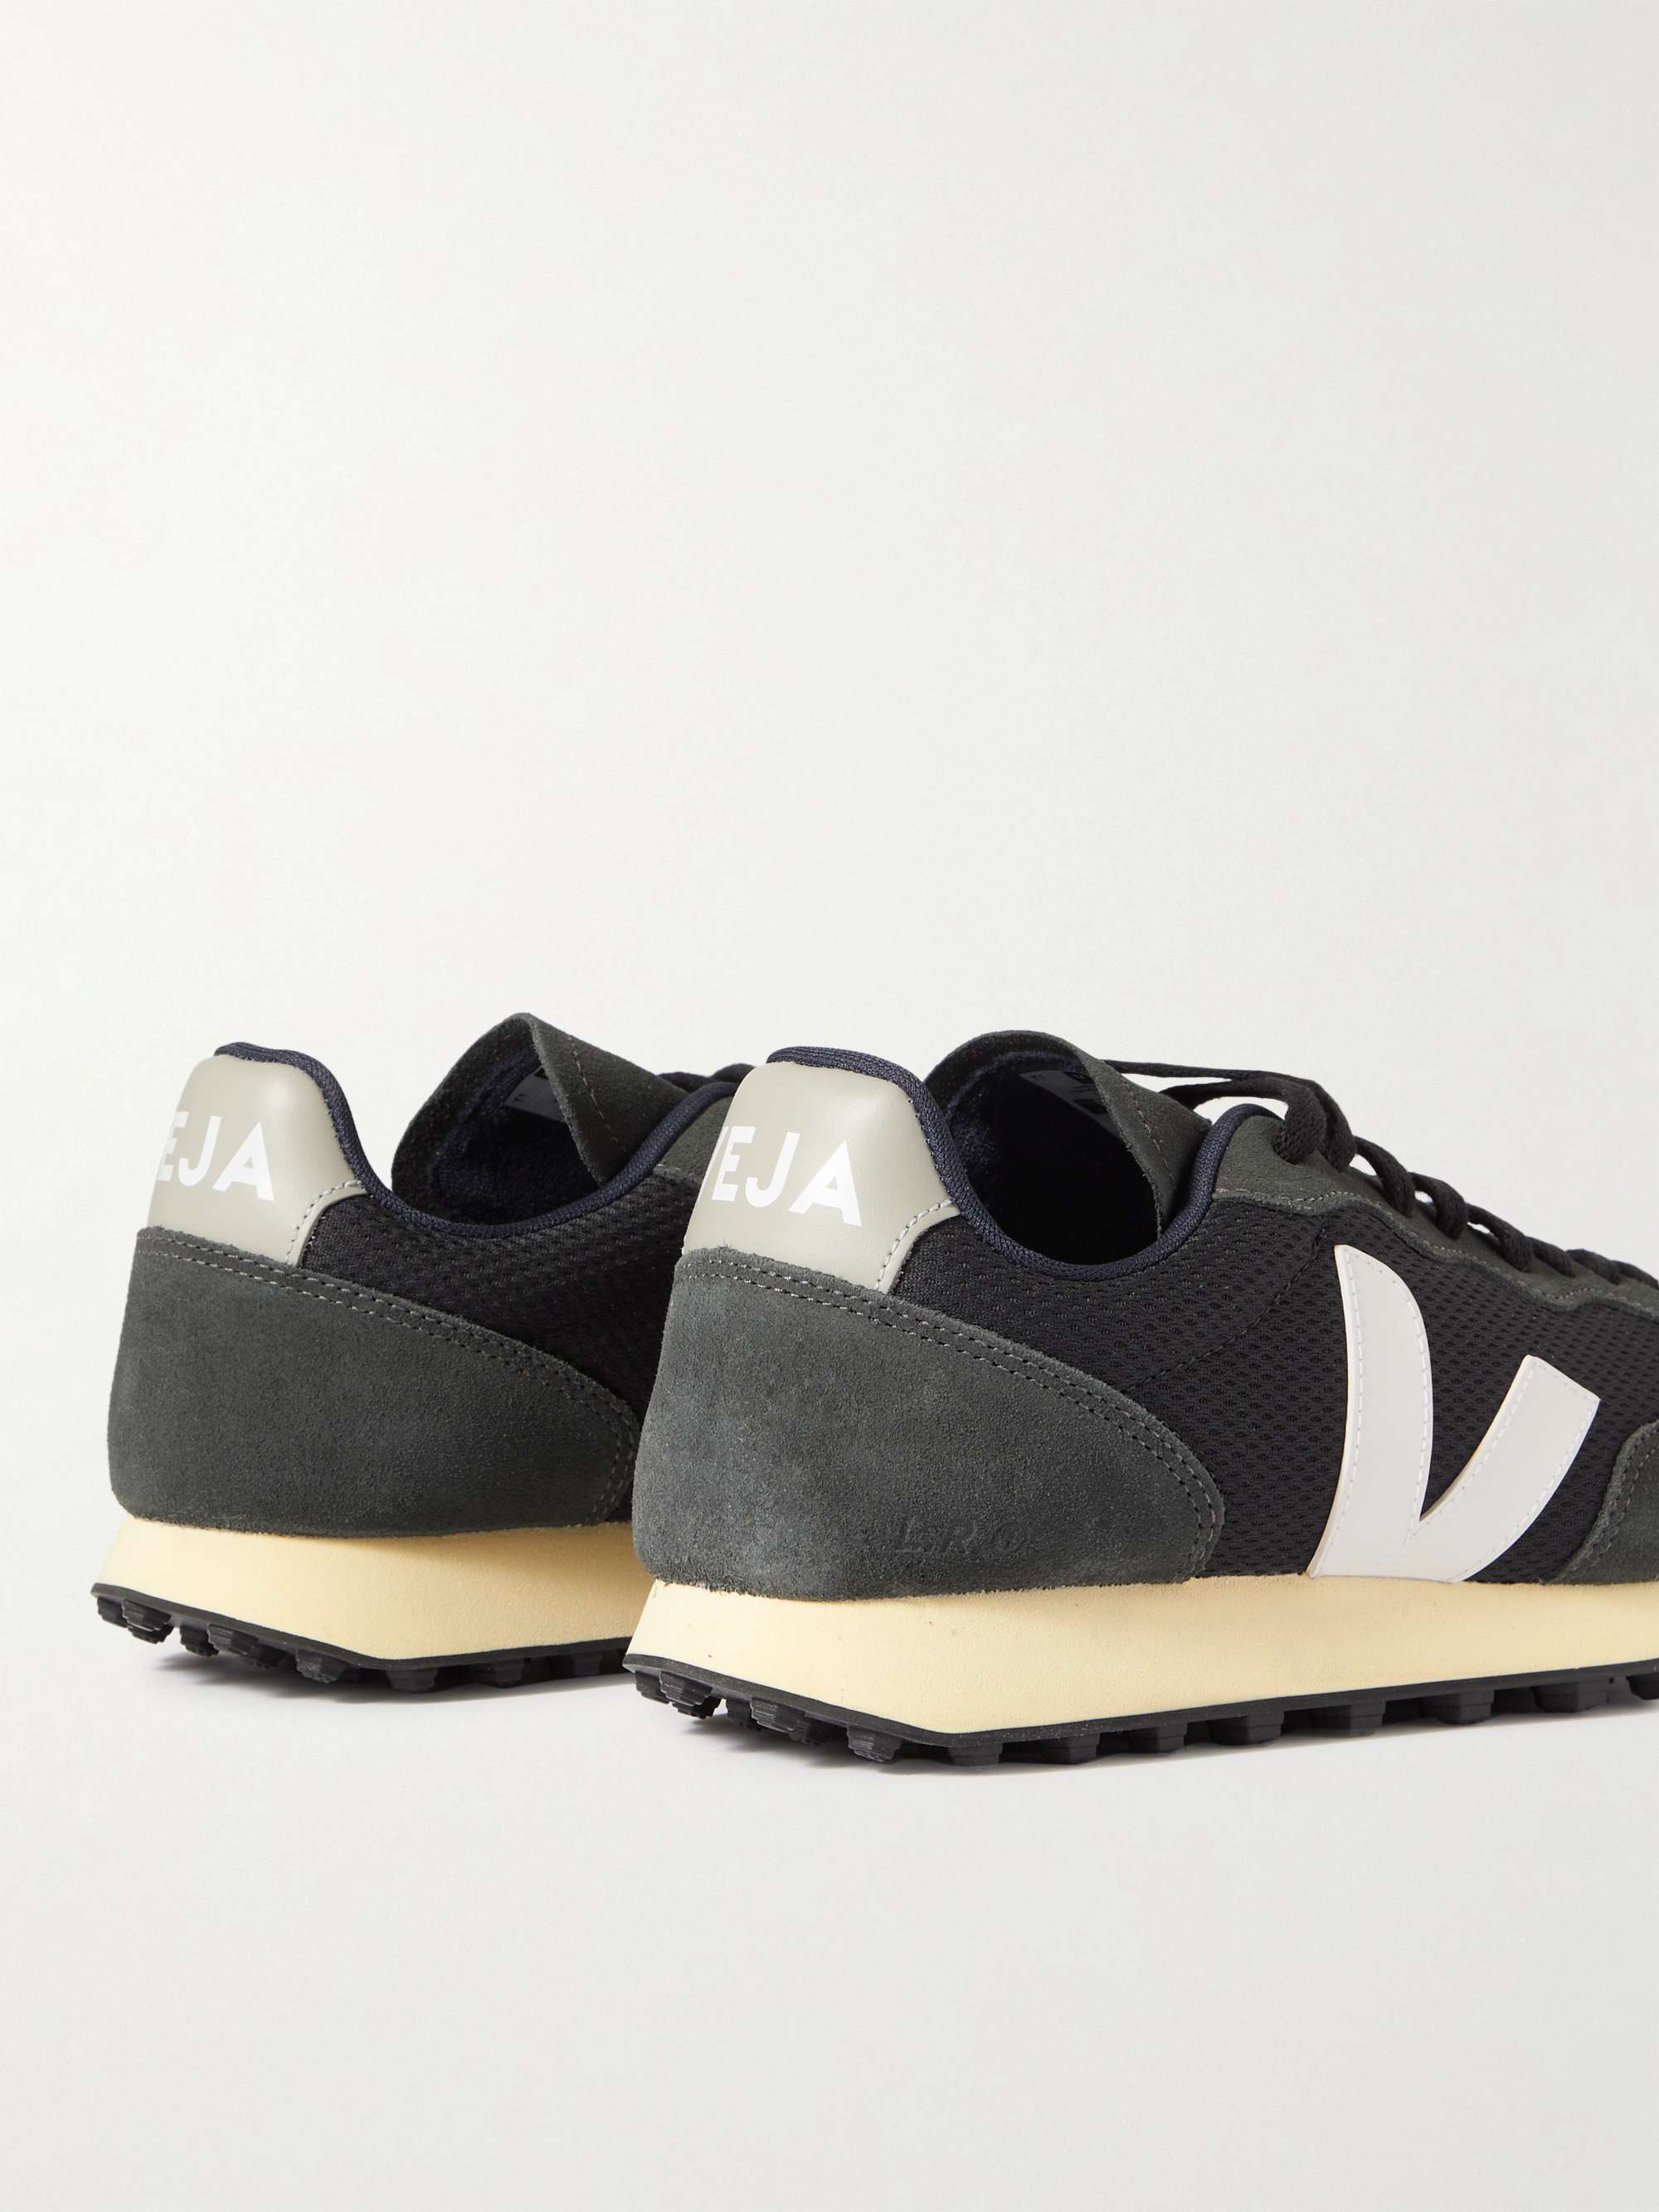 VEJA Rio Branco Leather-Trimmed Alveomesh and Suede Sneakers | MR PORTER